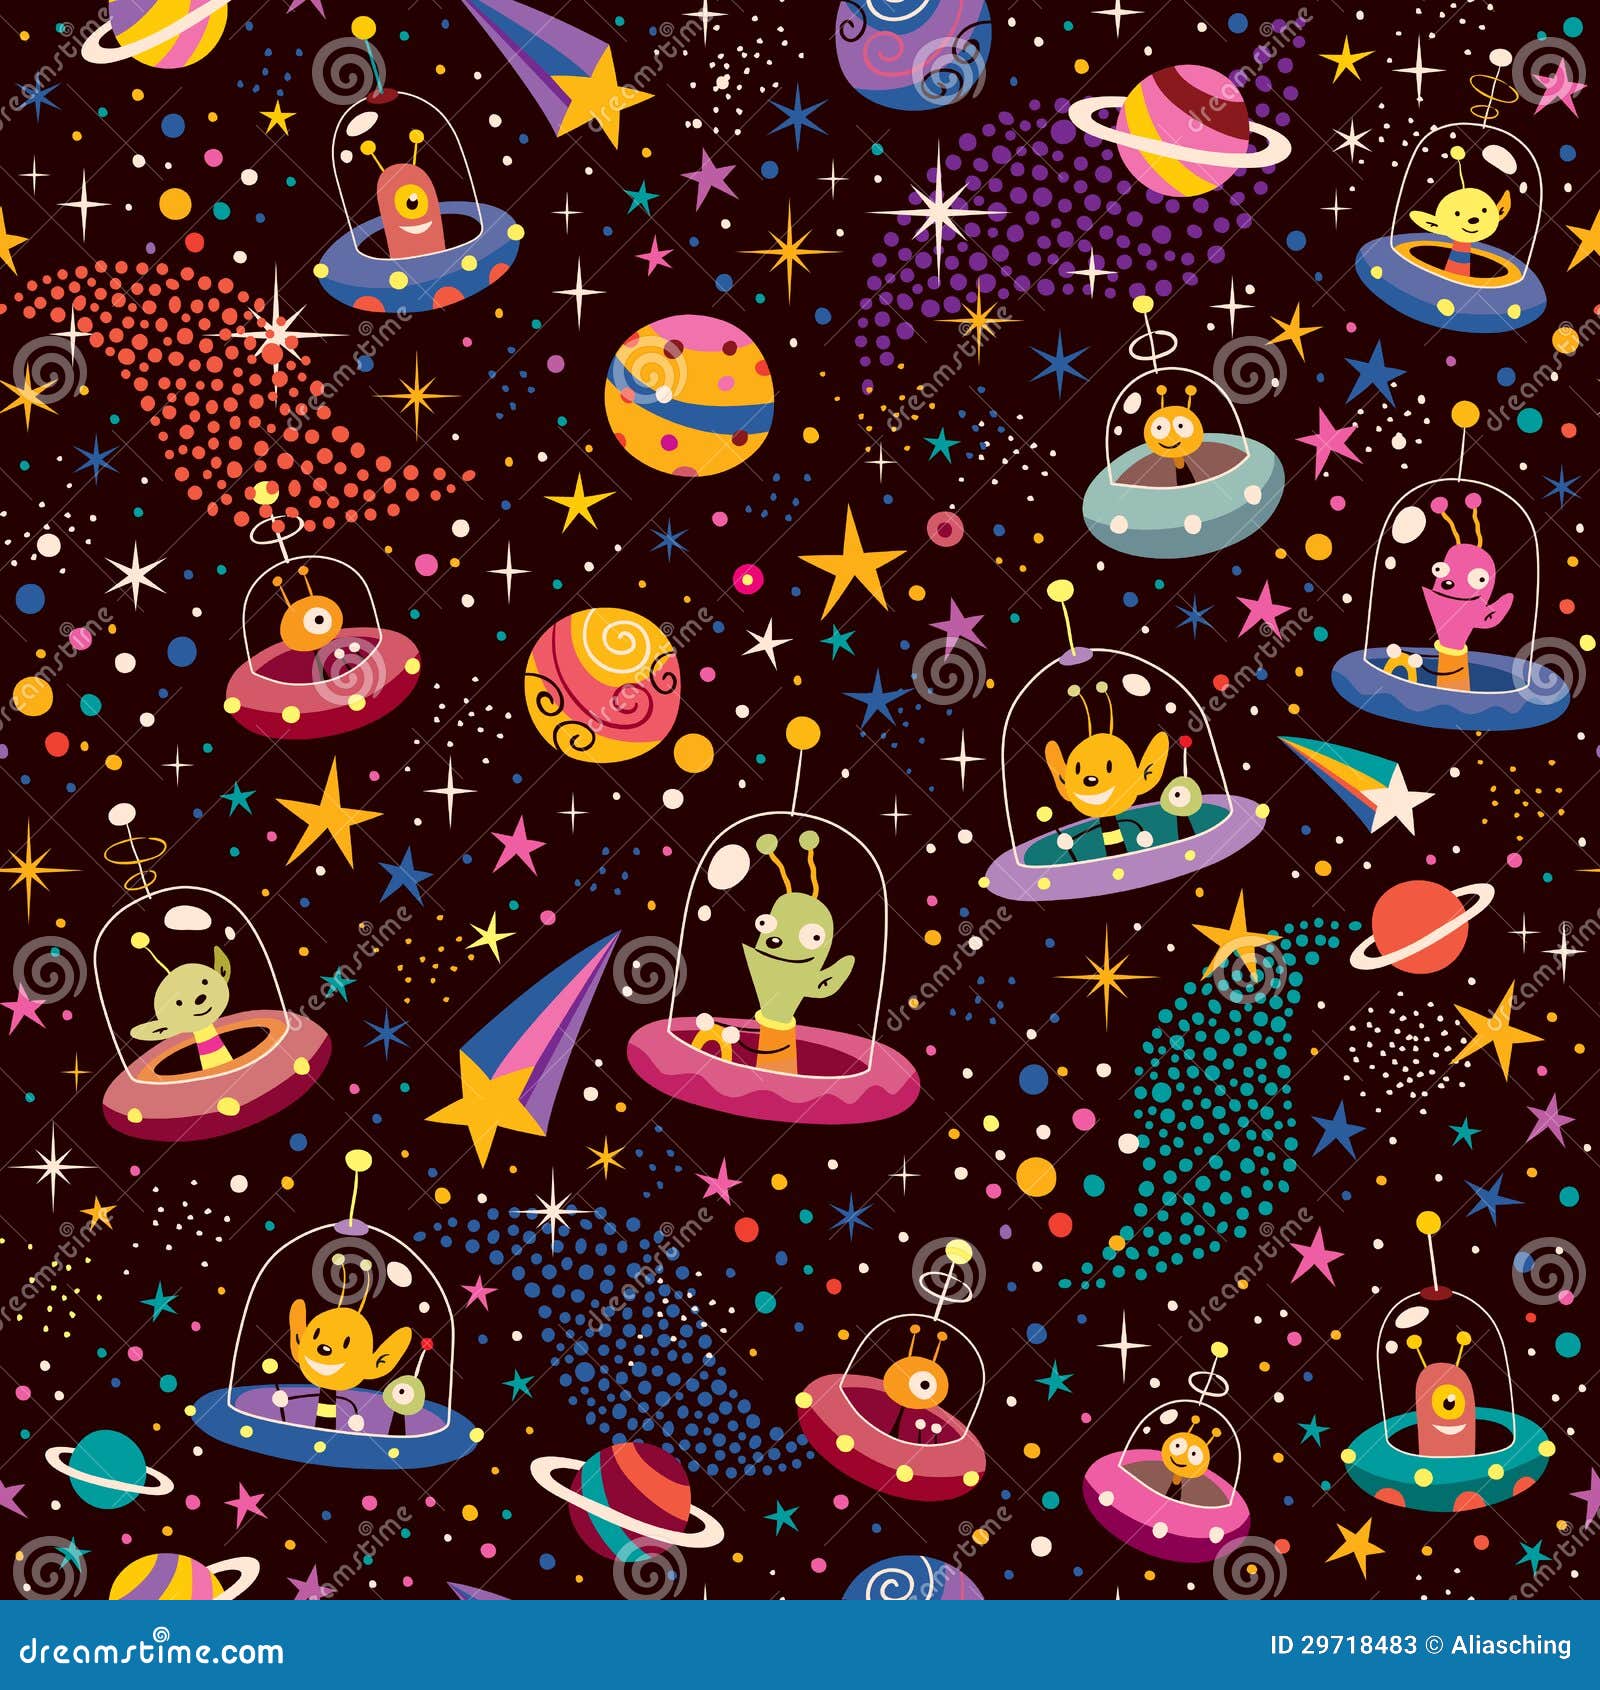 backgrounds ufo tumblr Aliens  Pattern Photos 29718483 Cute Image: Stock